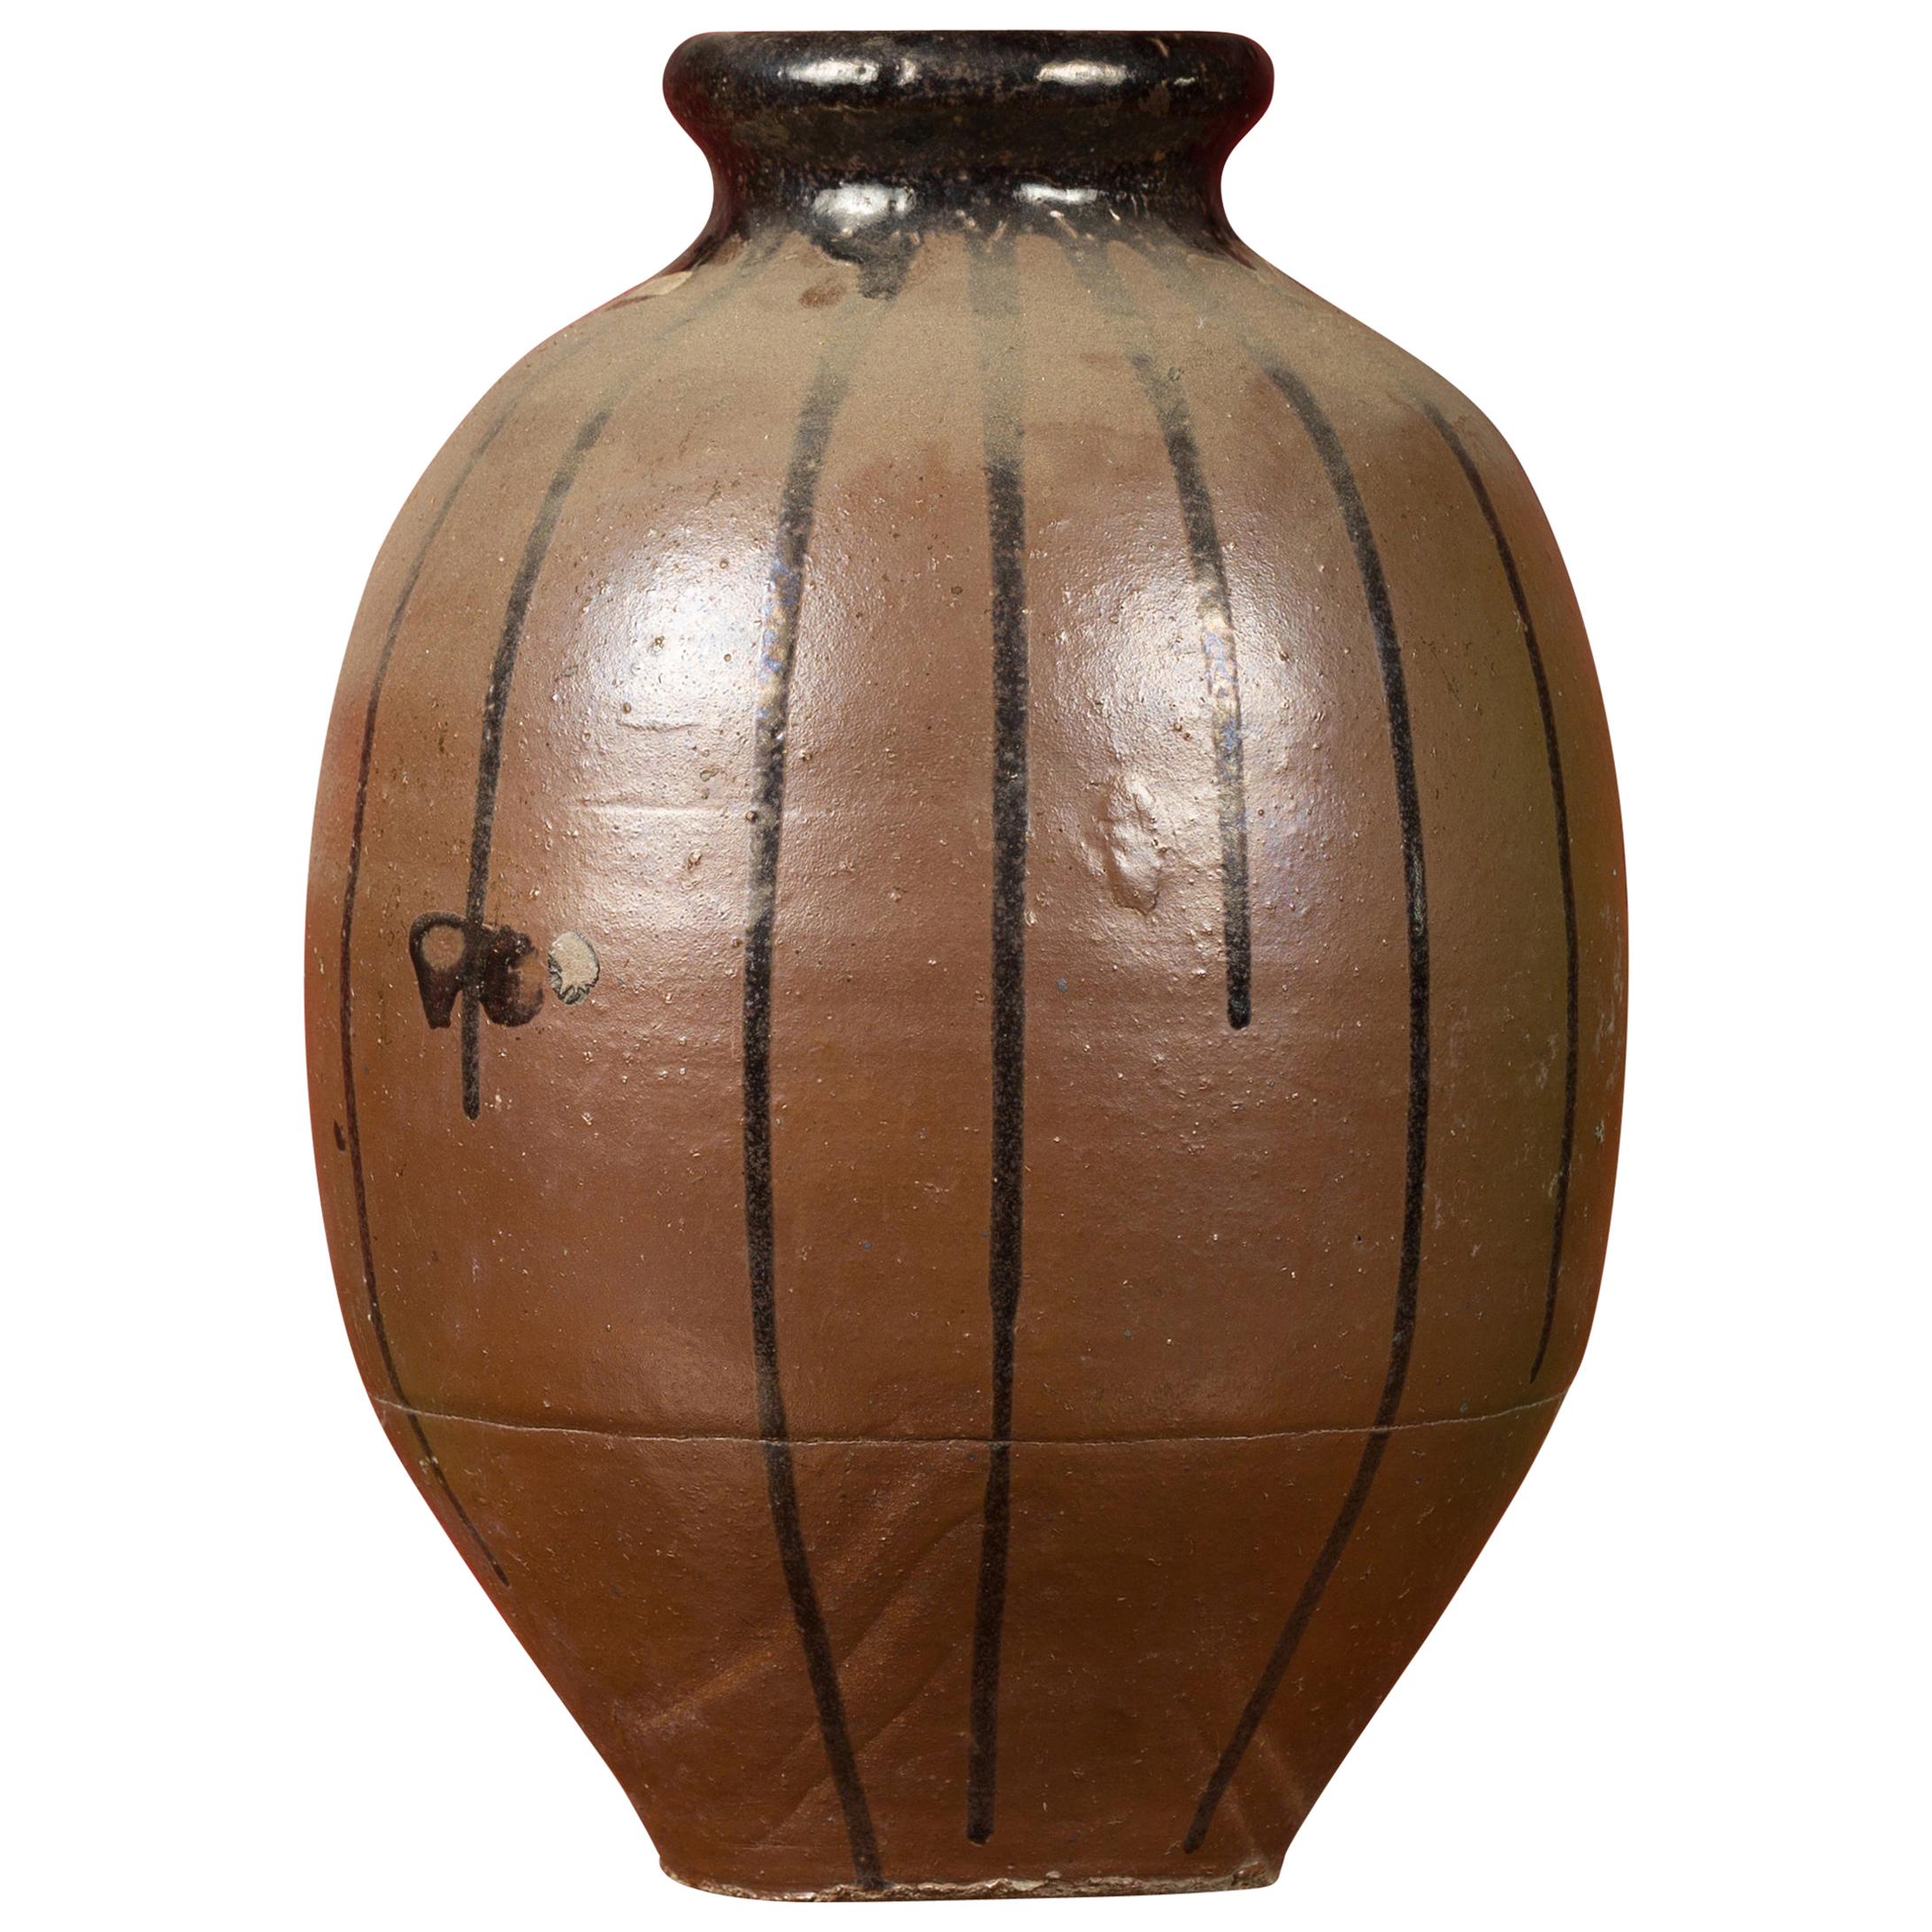 Meiji Period Japanese 19th Century Vase with Brown and Black Patina